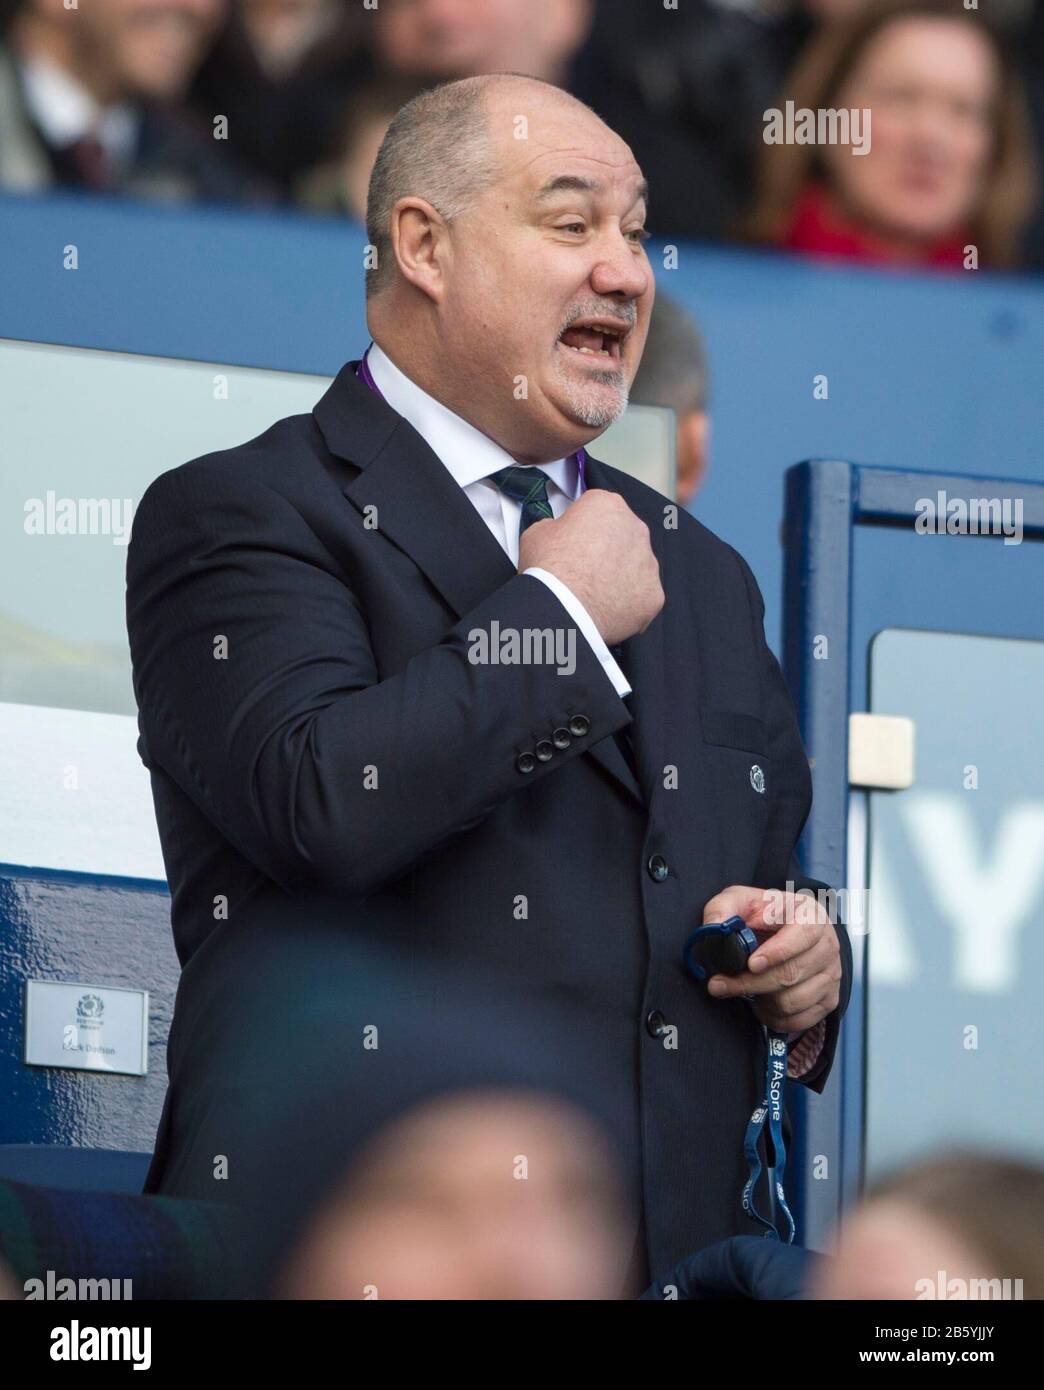 Guinness Six Nations Test: Scotland v France, BT Murrayfield Stadium, Edinburgh, Scotland, UK. 8th March, 2020. Scottish Rugby Union chief executive Mark Dodson in the Royal Box before the match.  Credit: Ian Rutherford/Alamy Live News. Stock Photo